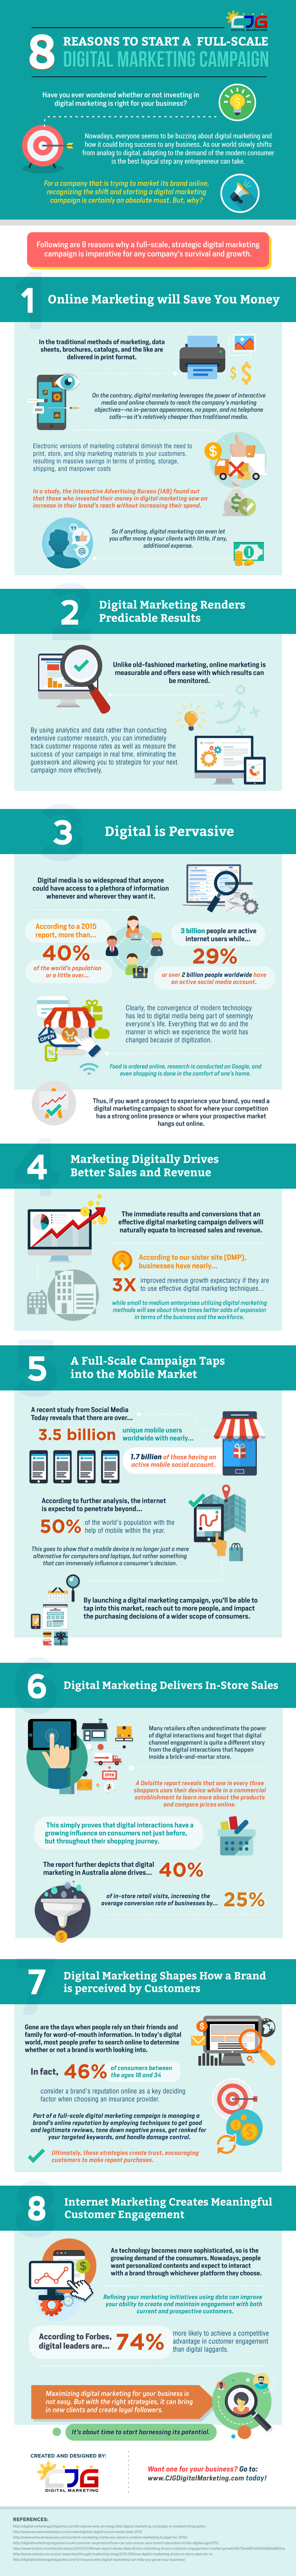 8-Reasons-to-Start-a-Full-Scale-Digital-Marketing-Campaign